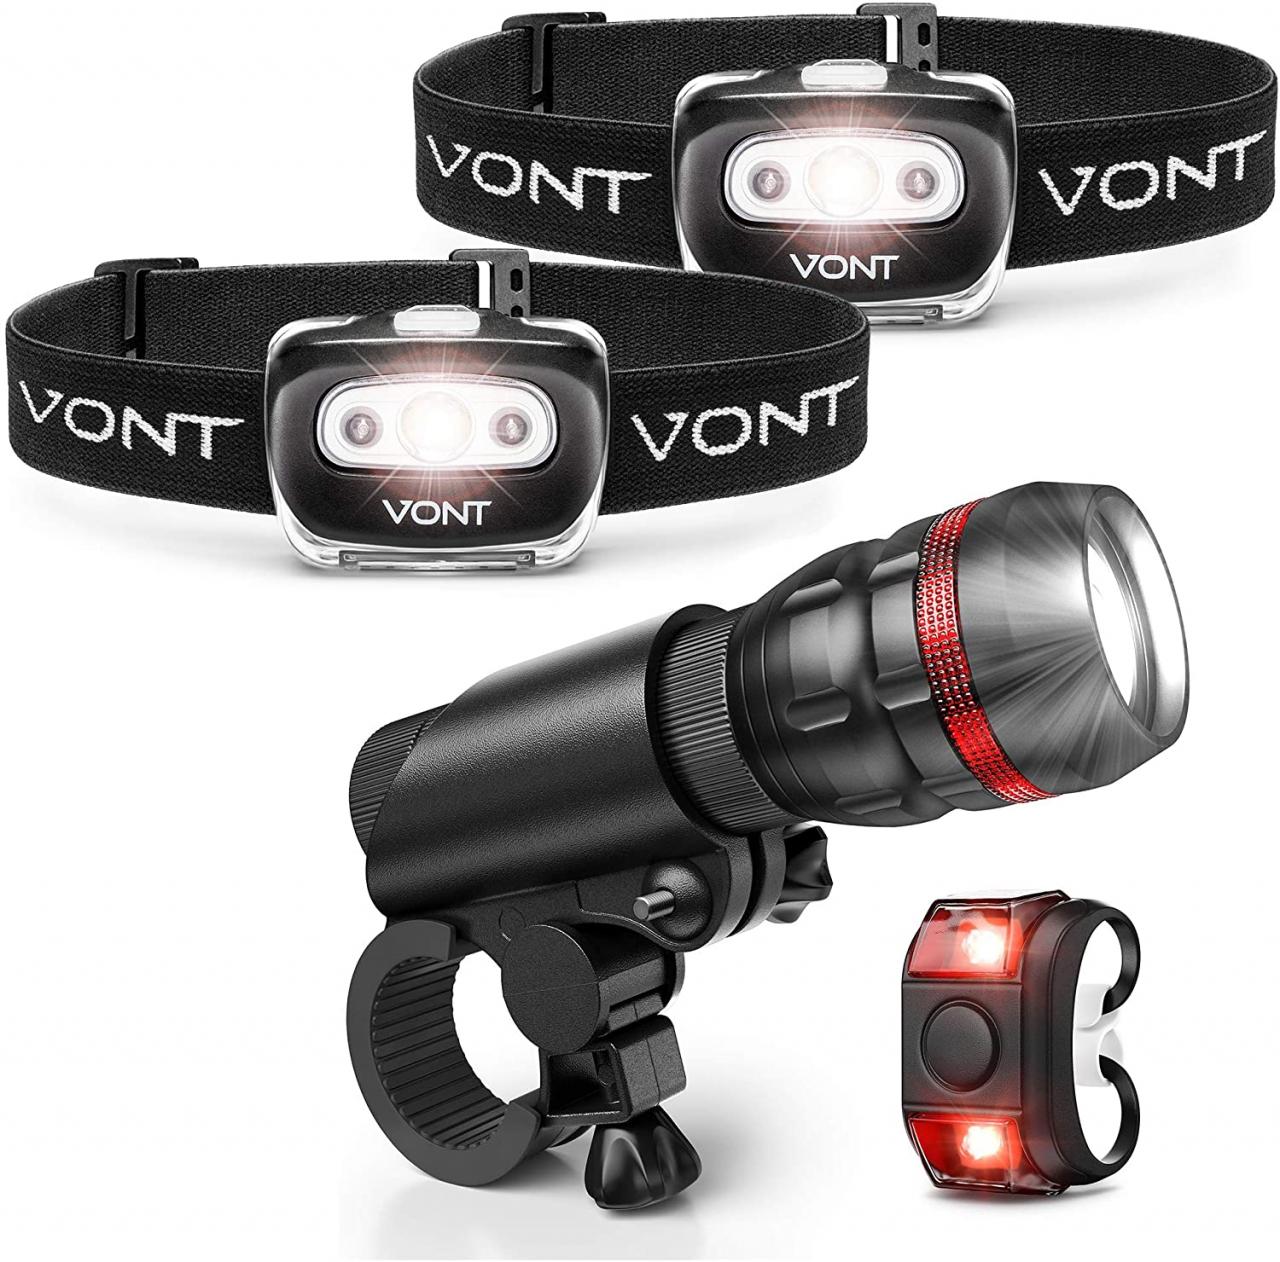 Buy Vont 2-Pack Spark Headlamp + 1Pc Bike Light Bundle - Best Lighting Set  for Your Outdoor and Night Activities Like Camping, Biking, Hunting,  Backpacking - Must-Have for Power Outages and Emergencies